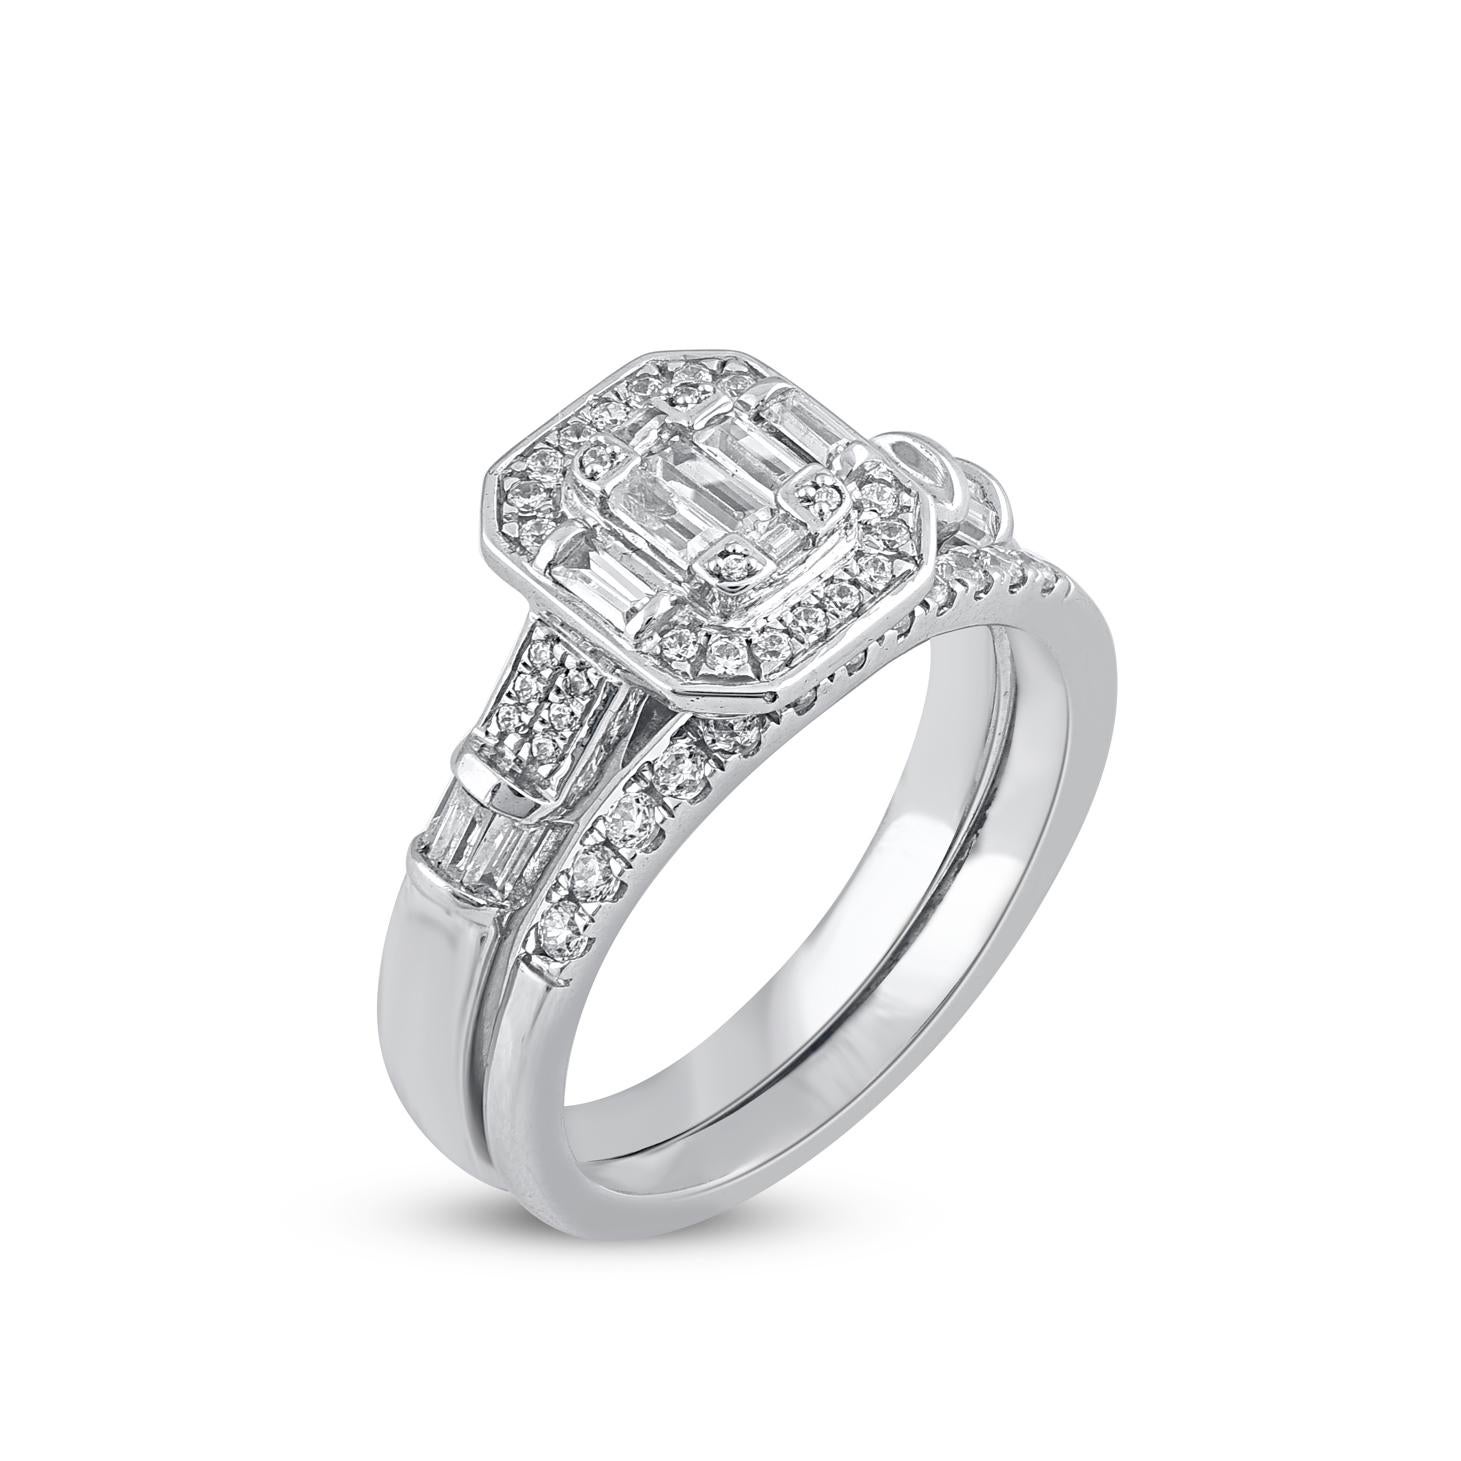 Contemporary TJD 0.60 Carat Round and Baguette Cut Diamond 14KT White Gold Bridal Ring Set For Sale